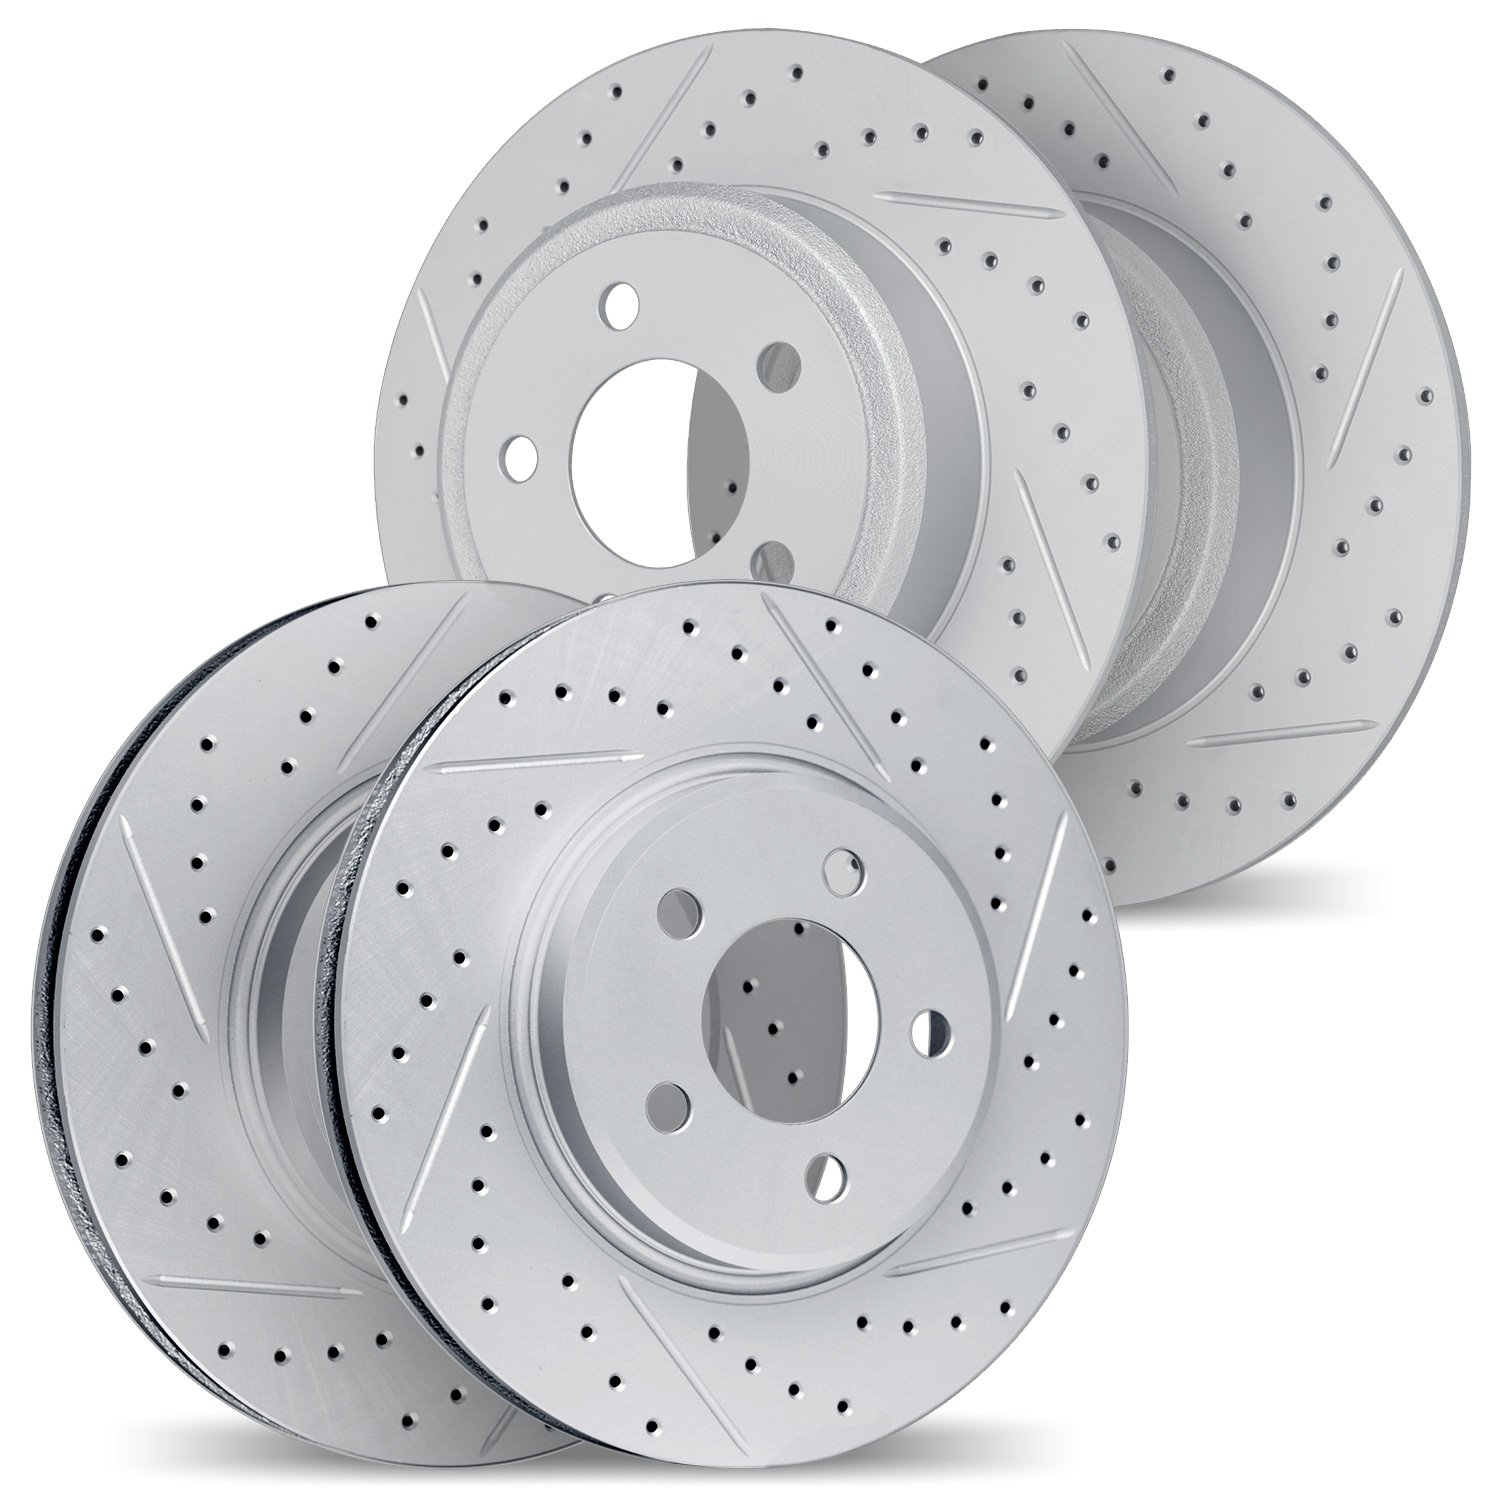 2004-31073 Geoperformance Drilled/Slotted Brake Rotors, 2001-2002 BMW, Position: Front and Rear